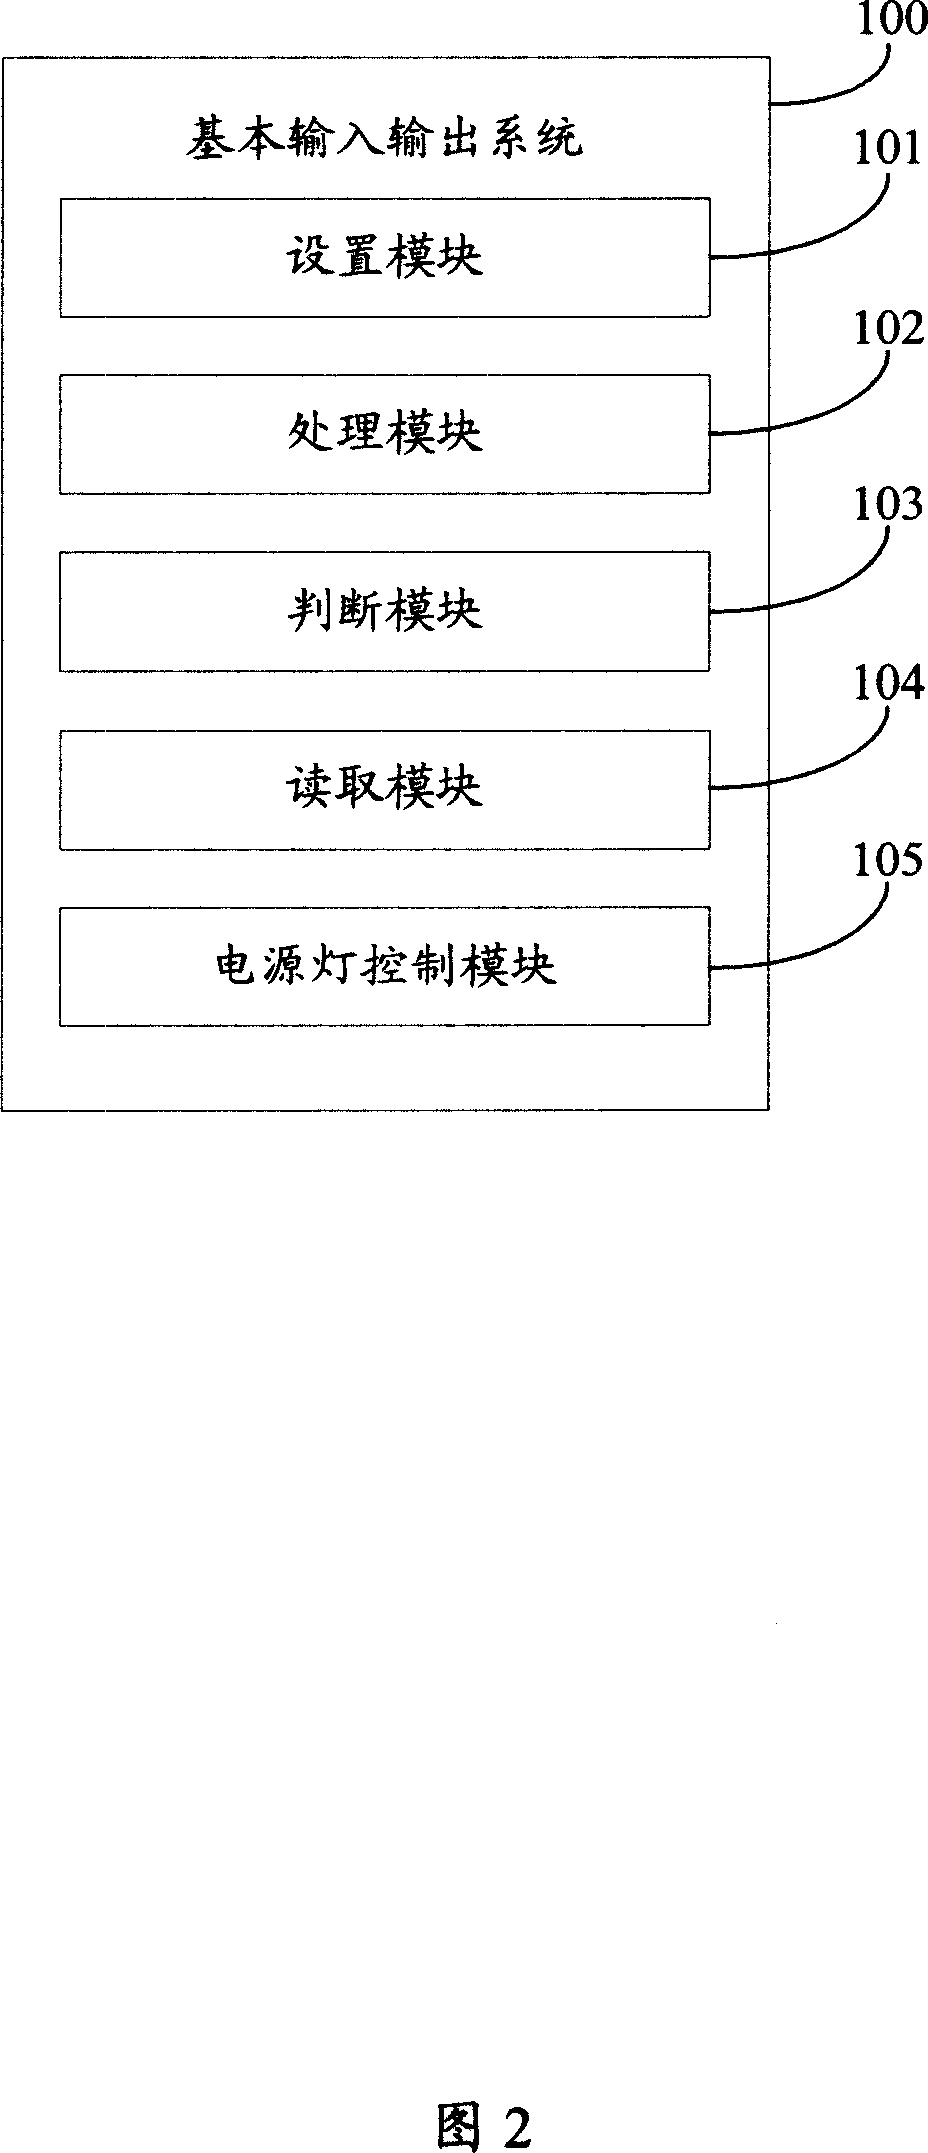 Master plate monitoring system and method